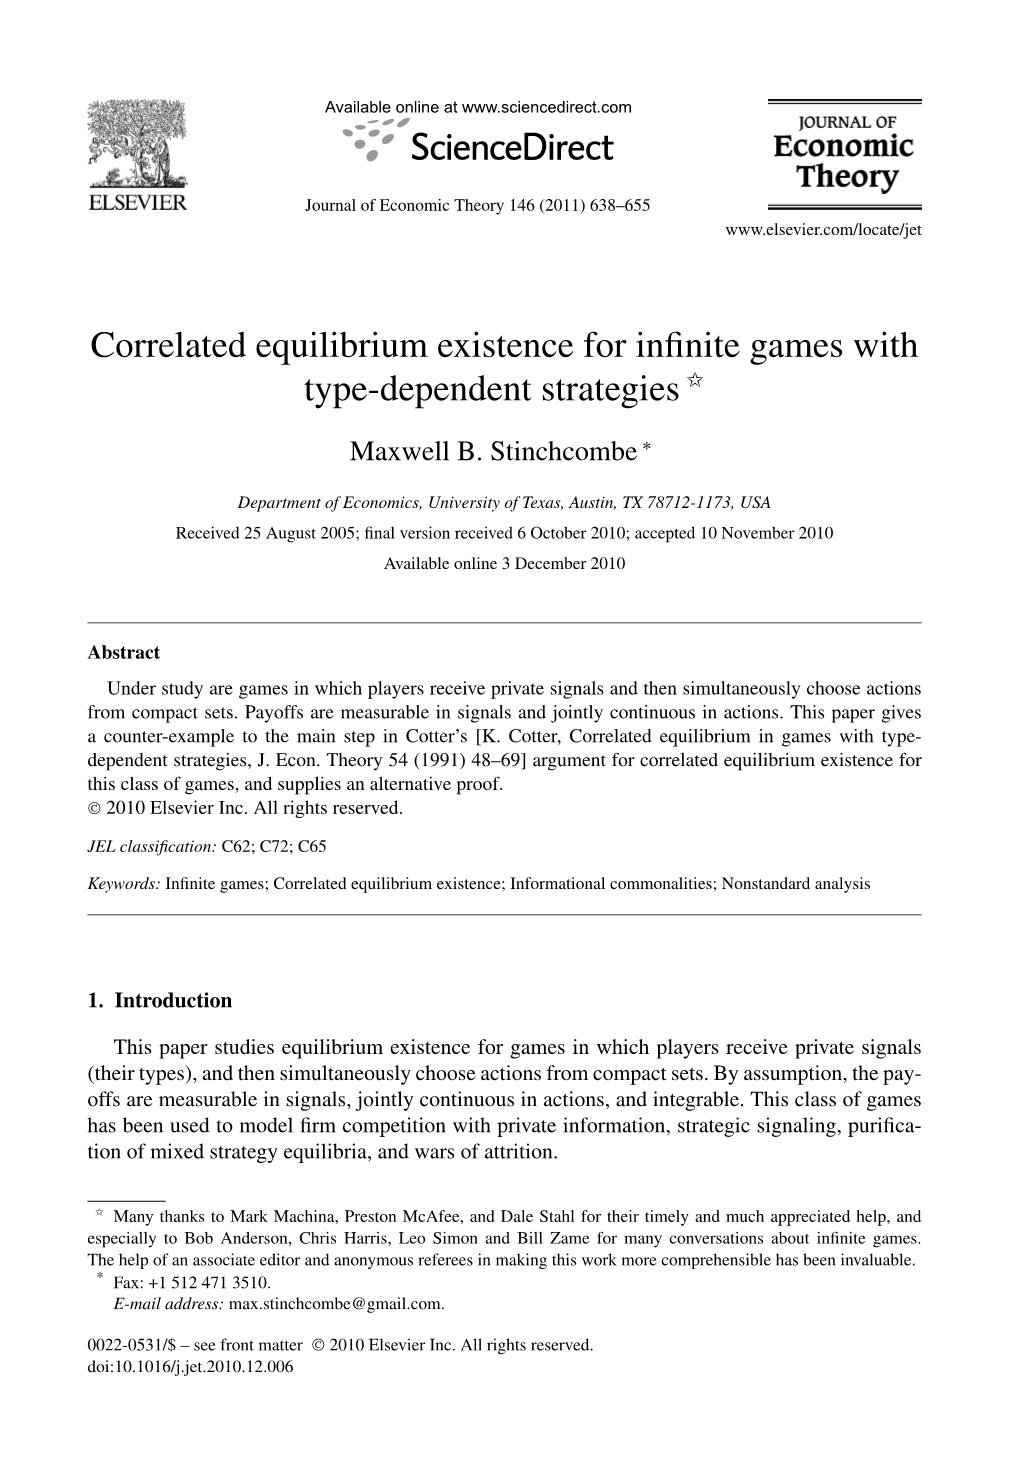 Correlated Equilibrium Existence for Games with Type-Dependent Strategies